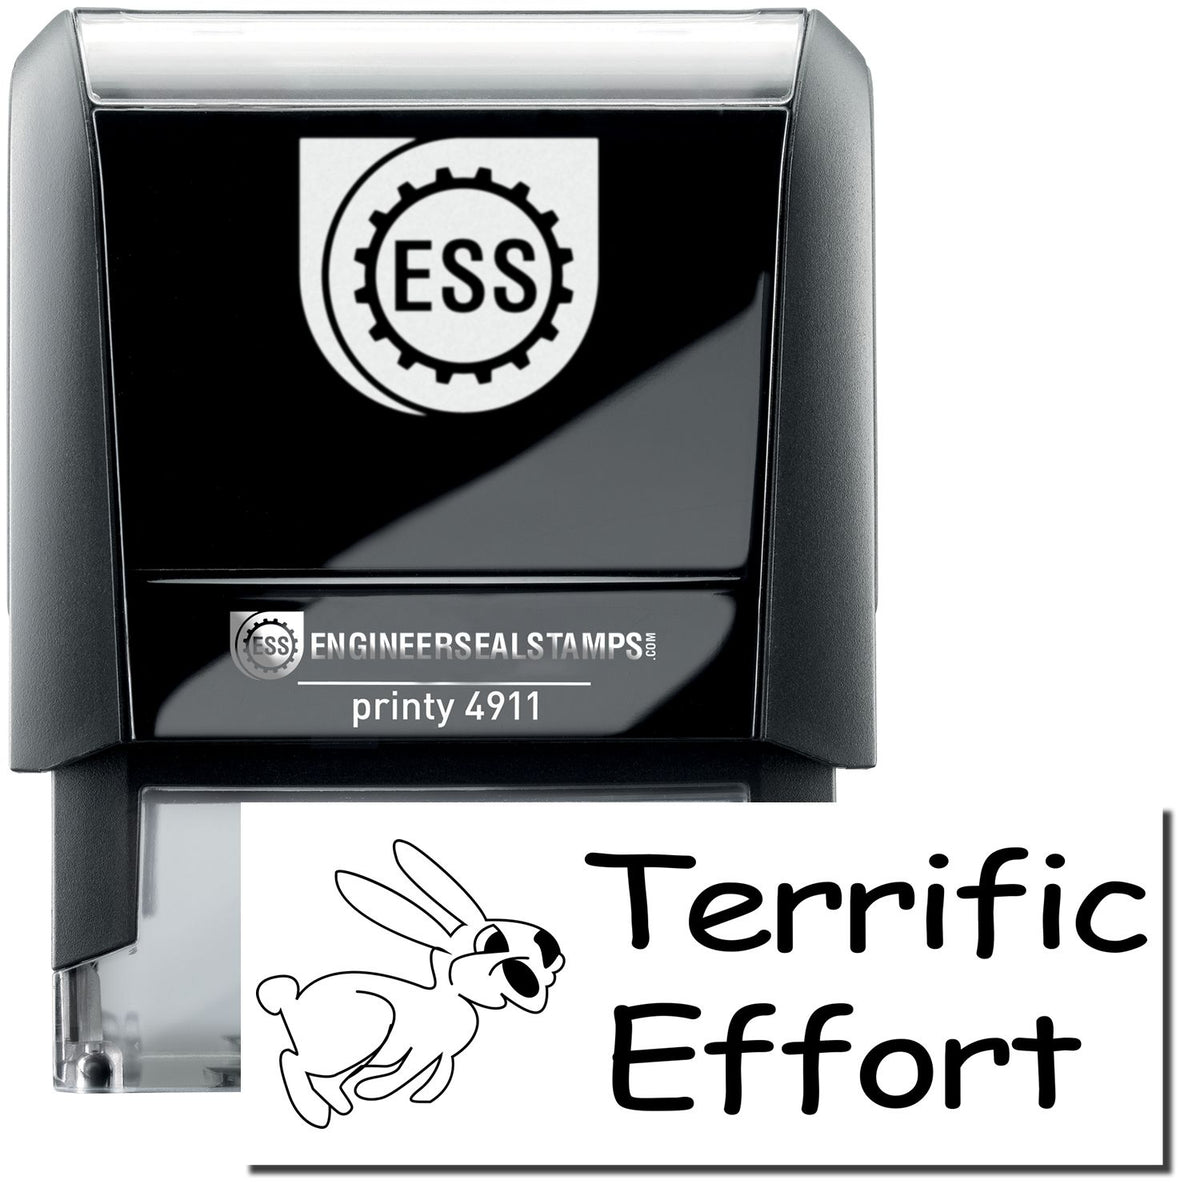 A self-inking stamp with a stamped image showing how the text &quot;Terrific Effort&quot; in an impactful bold font with an image of a hopping rabbit on the left side is displayed after stamping.